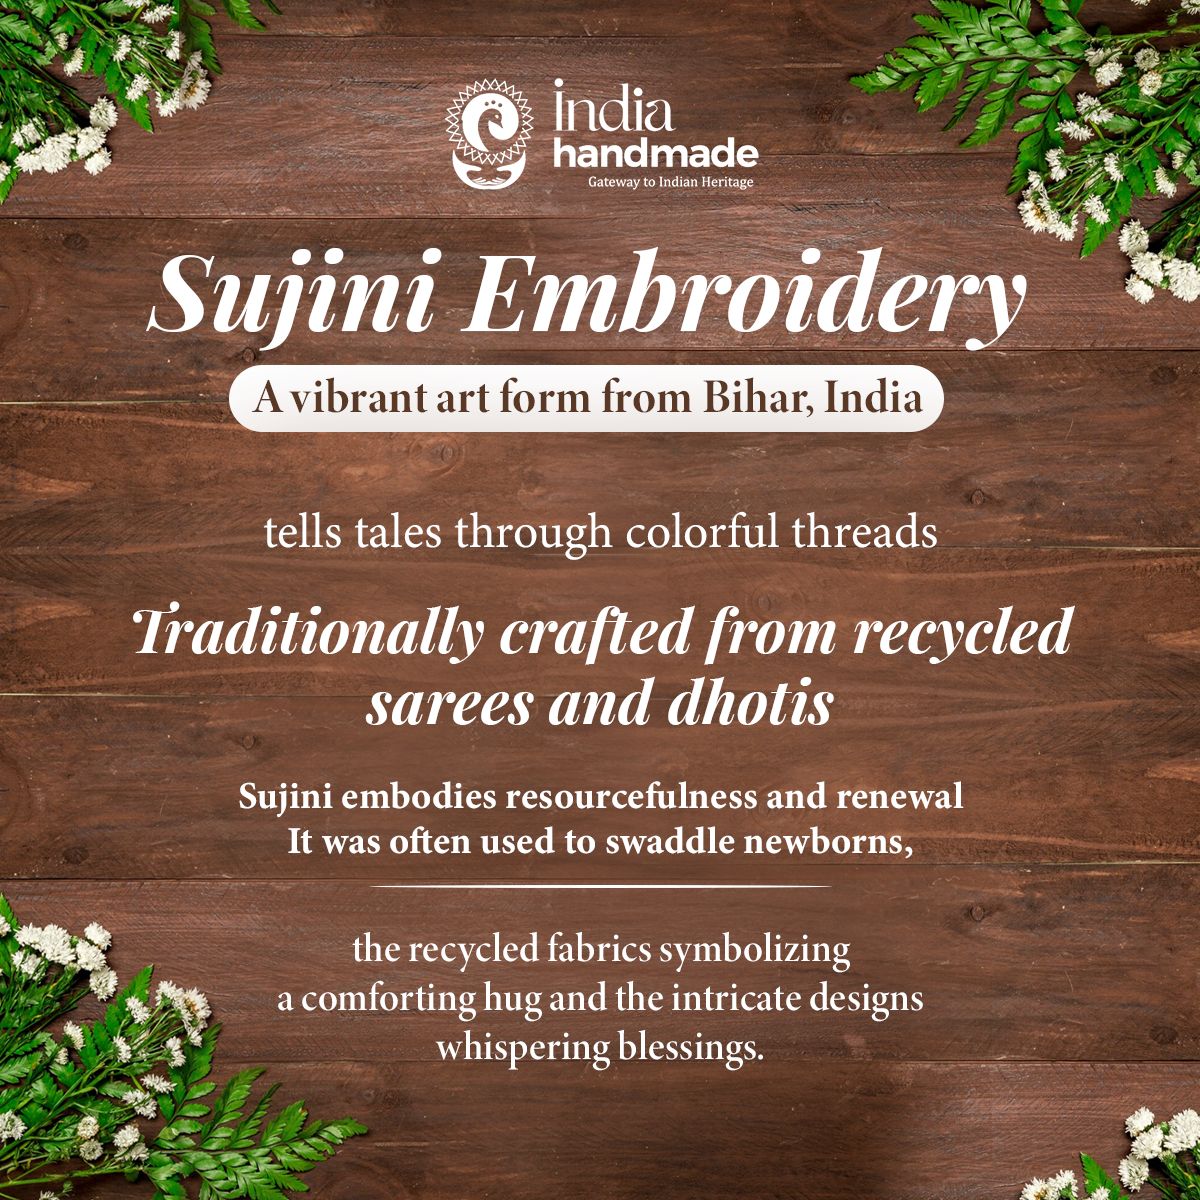 #sujiniembroidery is a meditative practice that promotes focus & well-being. It is traditionally made by women in #Bihar, & features natural motifs. Would you rather wear a Sujani masterpiece or have your home decorated with it?Comment below. #VocalforLocal #Indiahandmade #Sujani